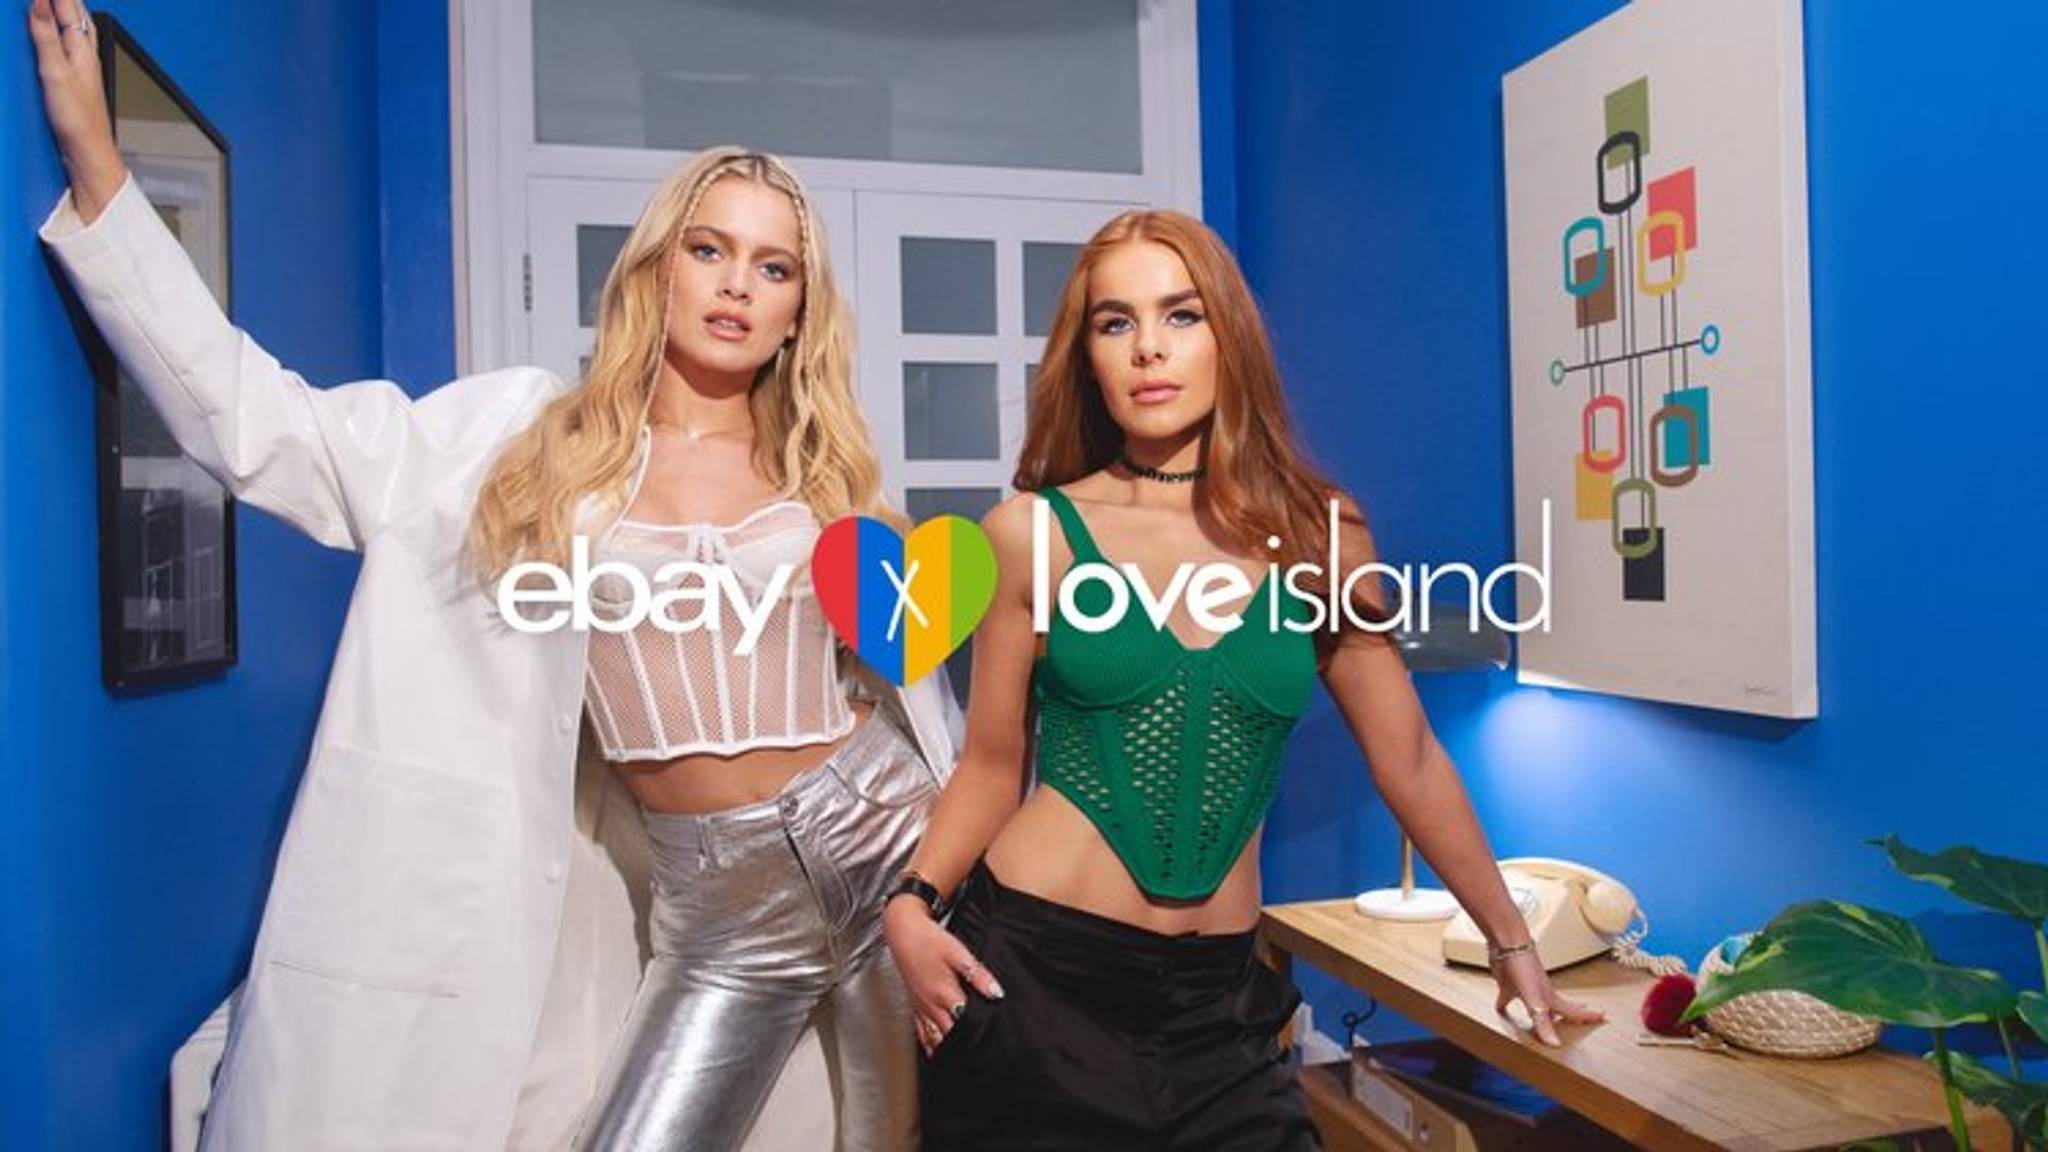 eBay and Love Island boost appeal of 'imperfect' luxury